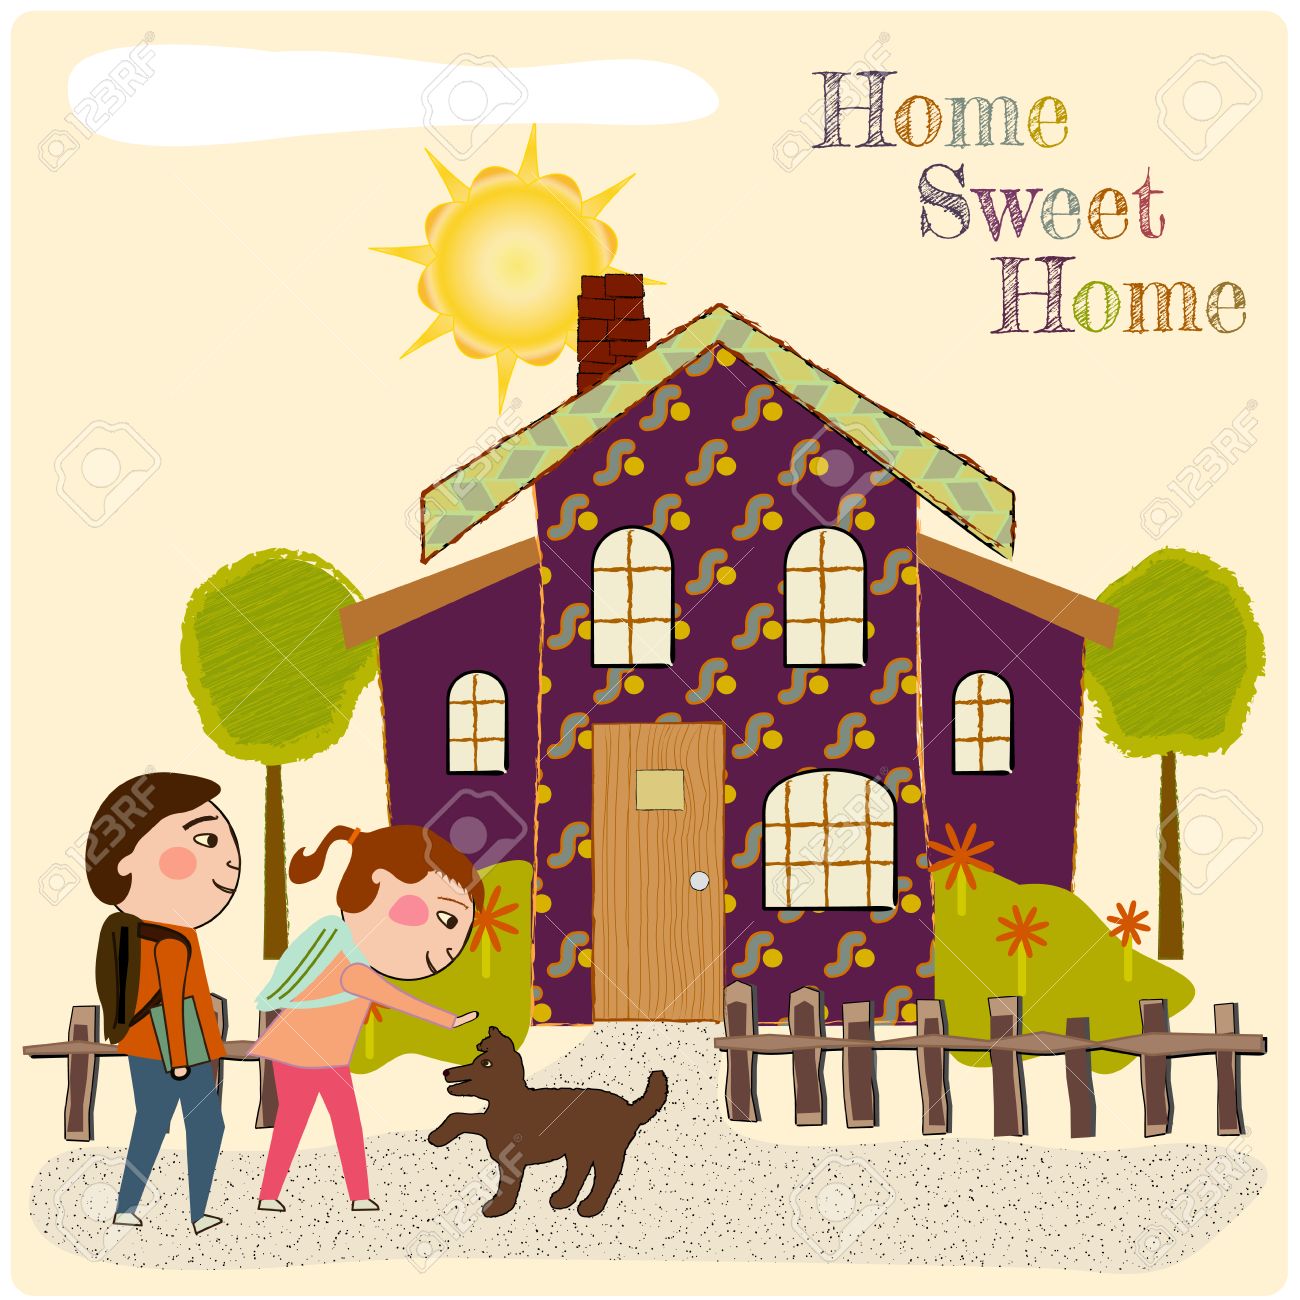 Come home game. Come Home картинки для детей. Home Sweet Home картинки for Kids. Дом сладостный дом. Home after School.